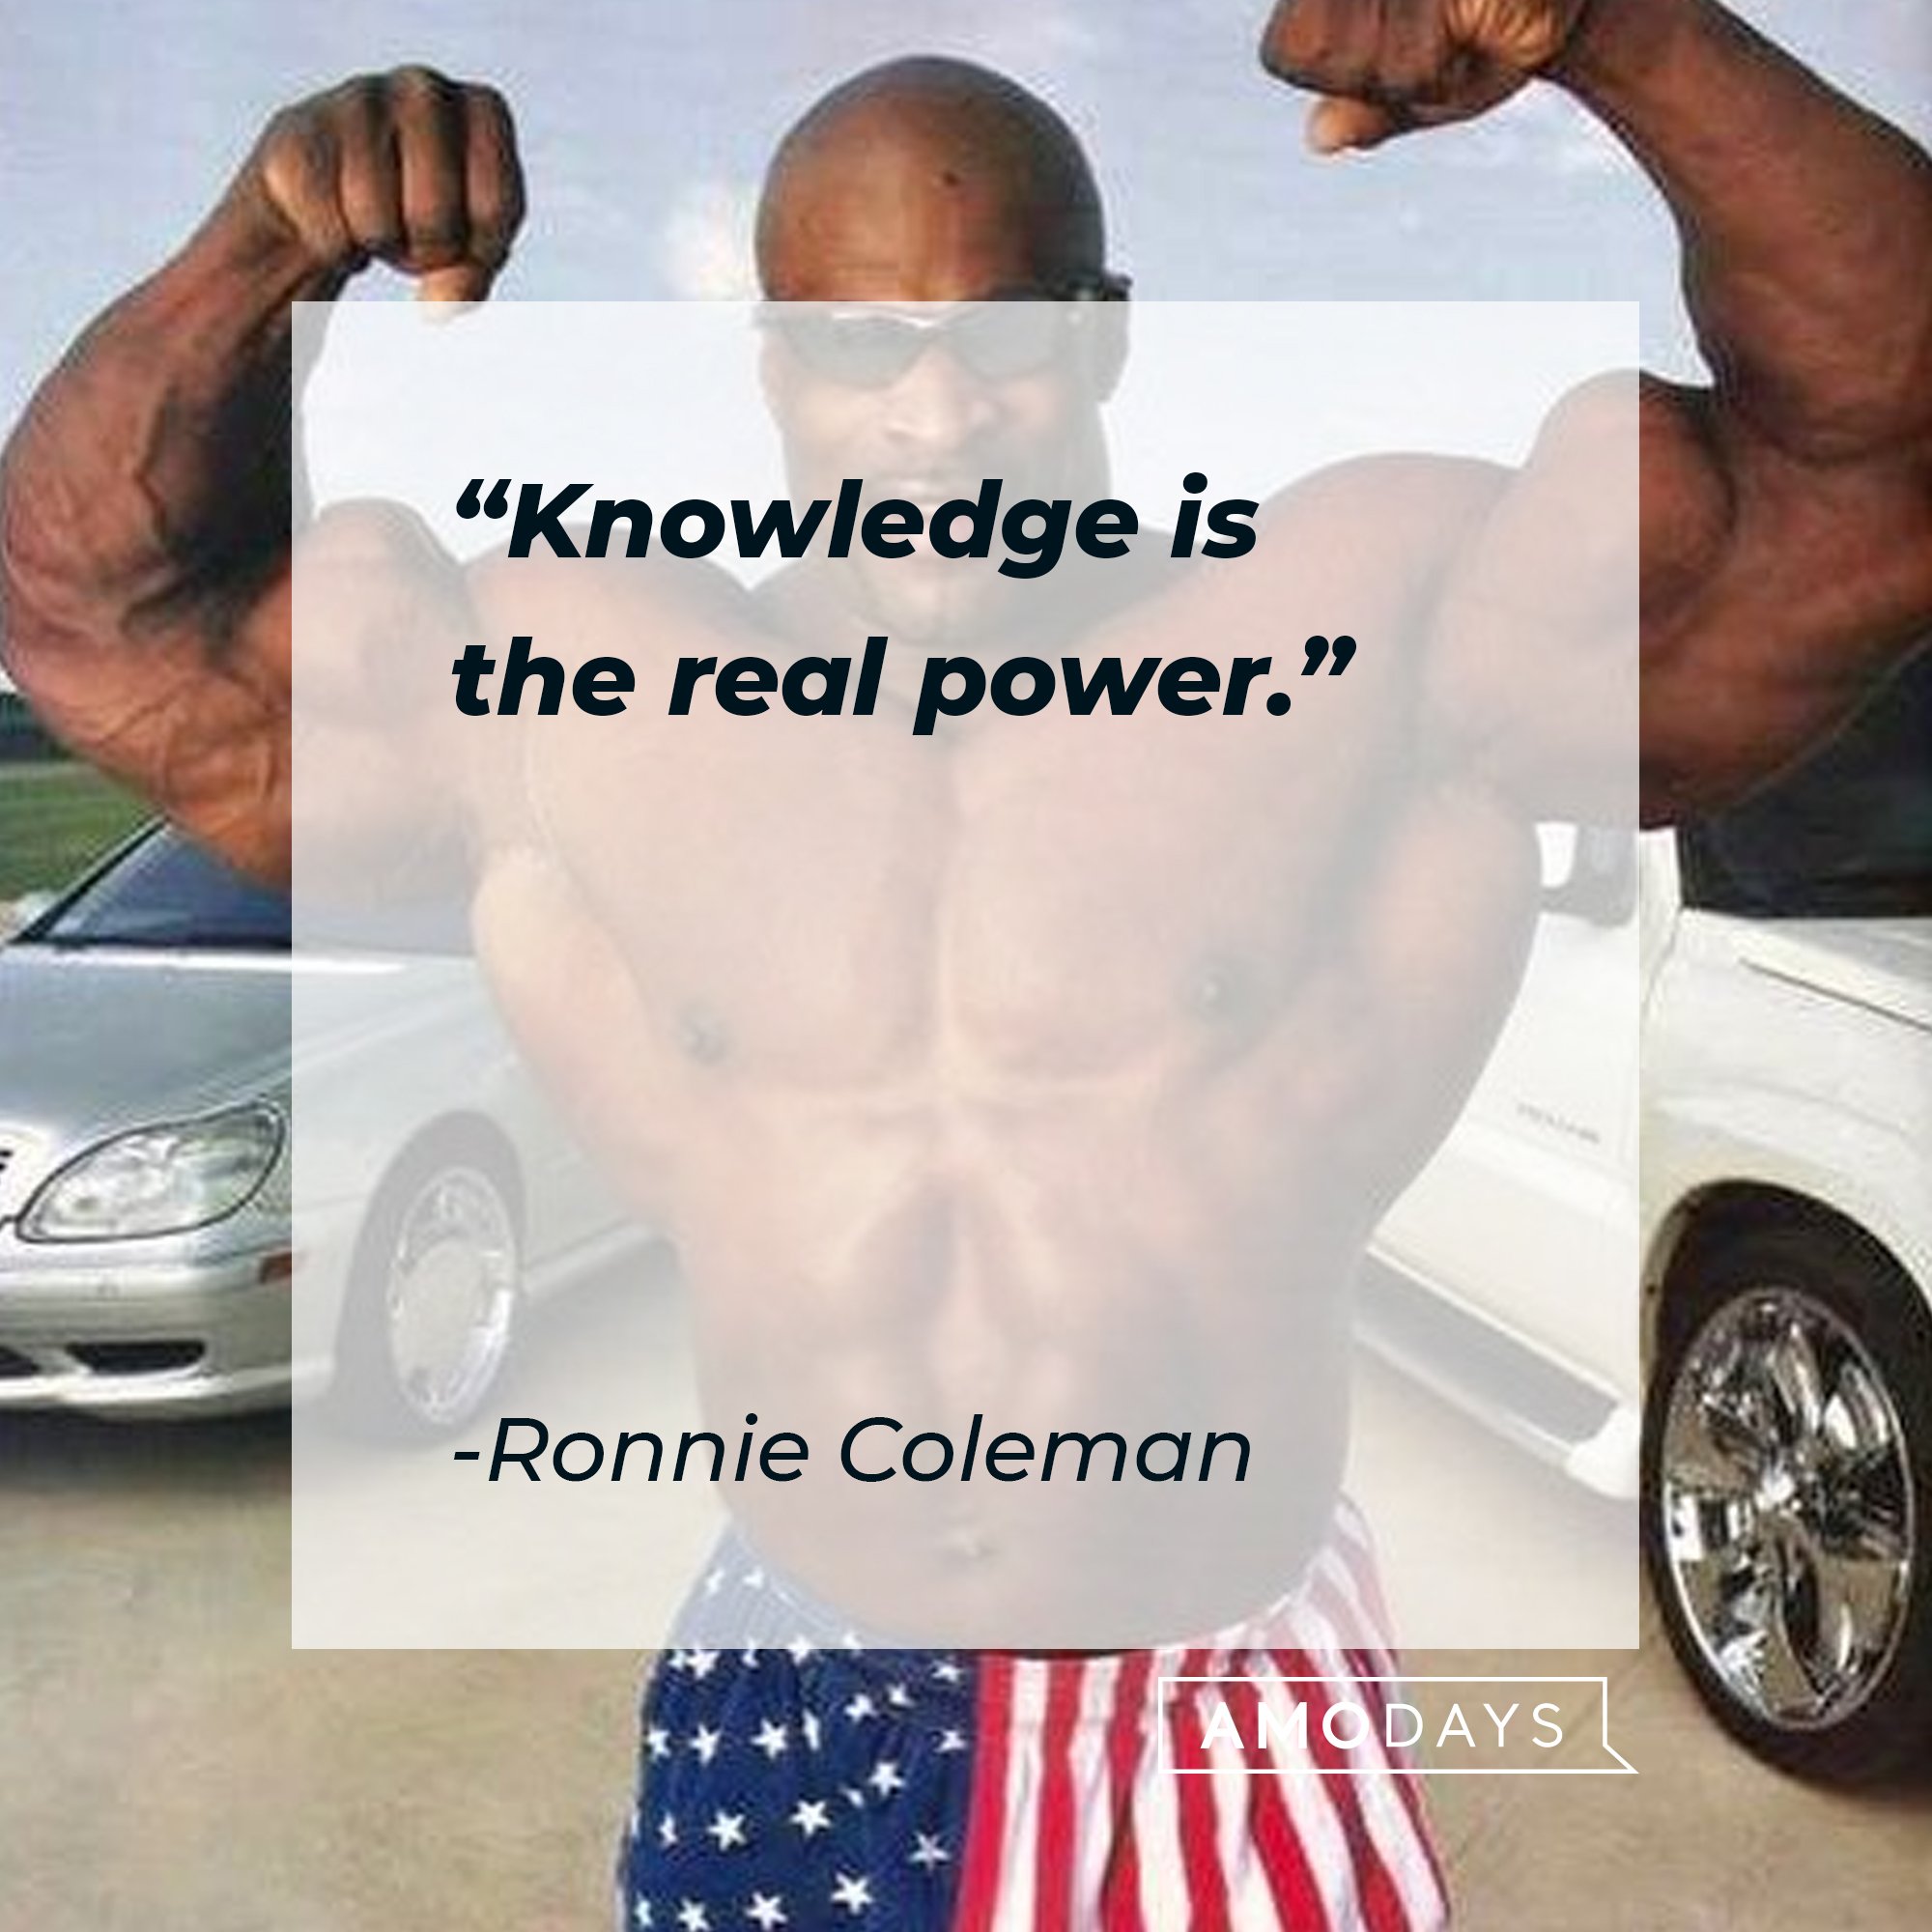  Ronnie Coleman’s quote: “Knowledge is the real power.” | Image: AmoDays